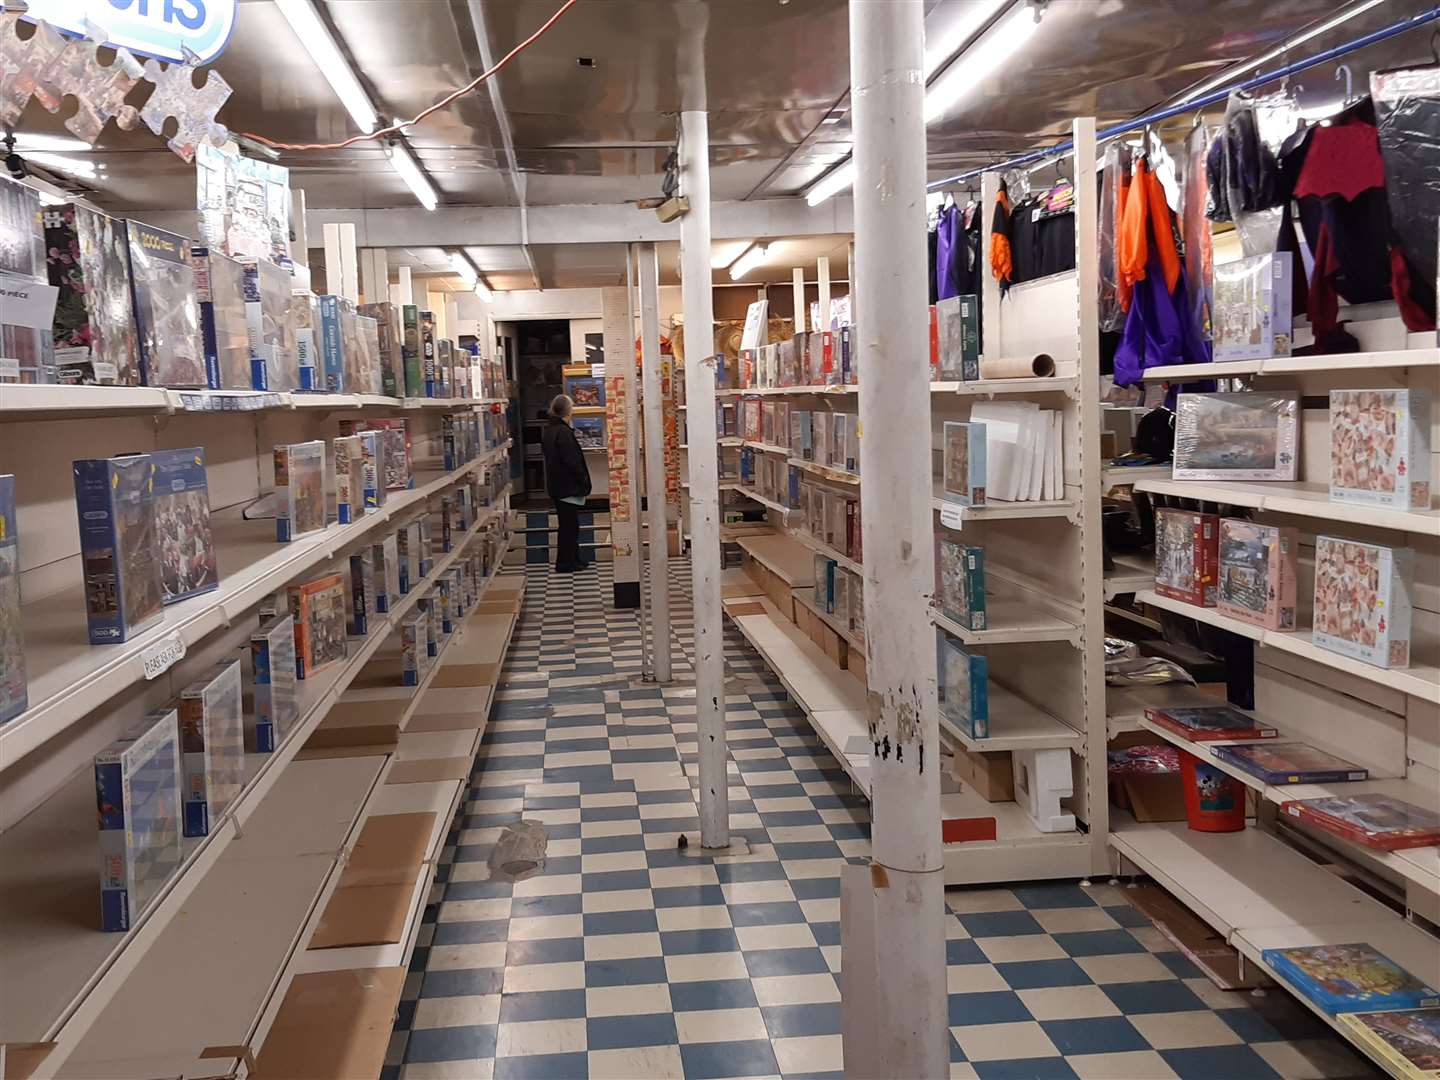 The near empty shelves of the toy shop in Milton Road.